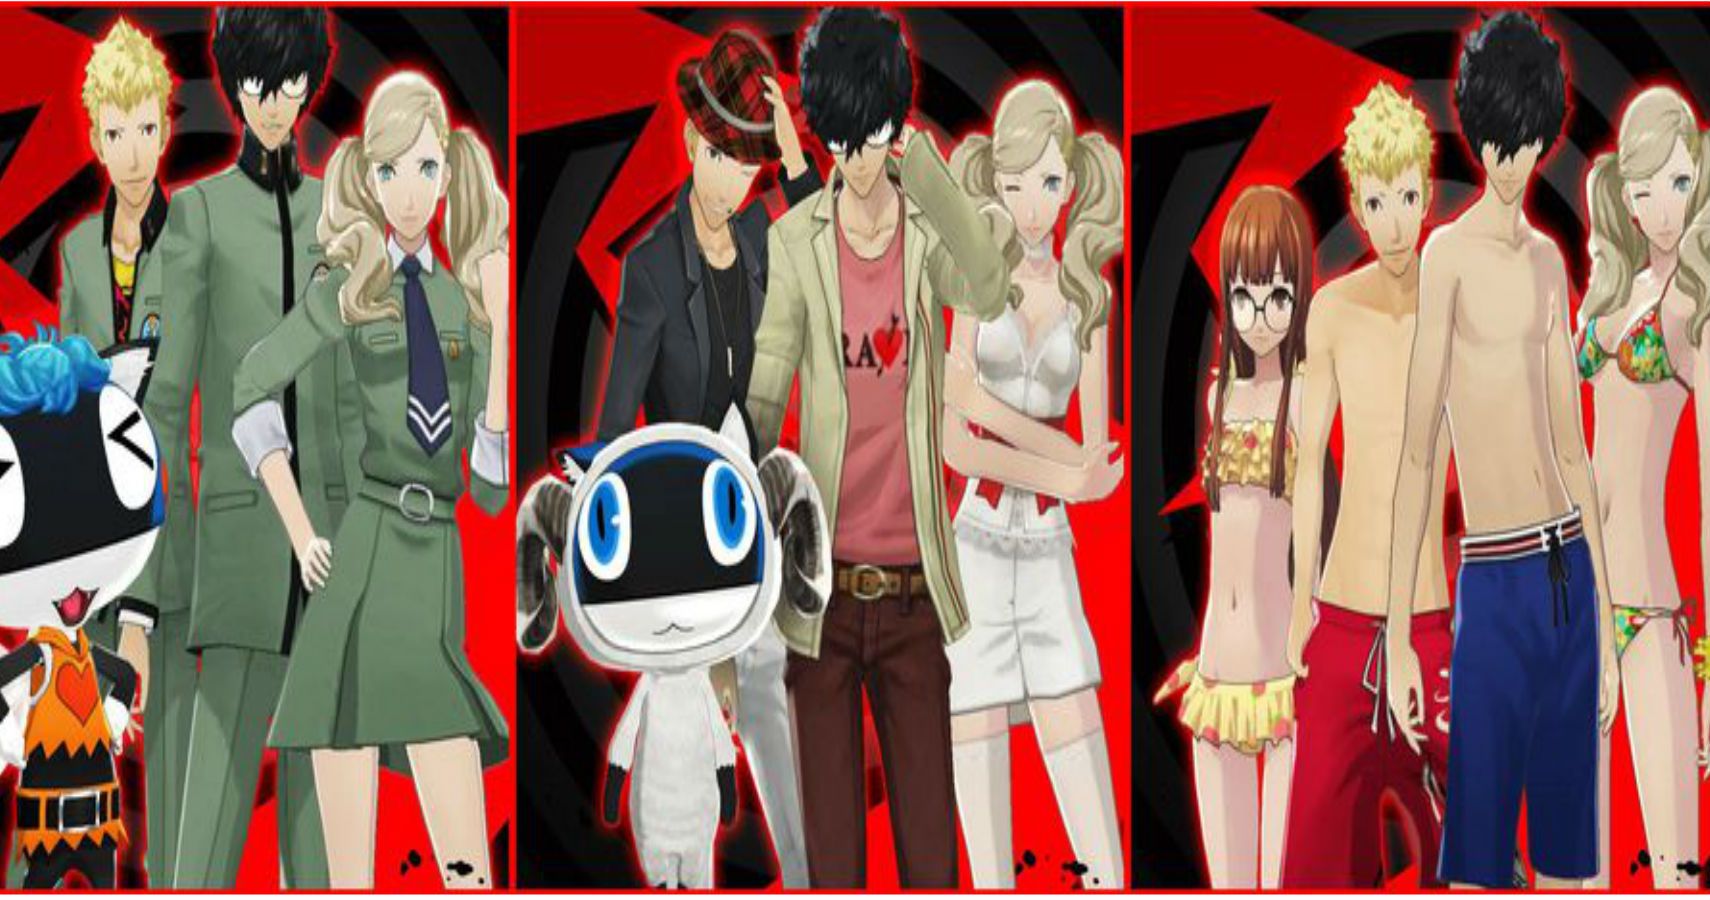 All Persona 5 DLC's Will Be Free for Western Persona 5 Royal Players